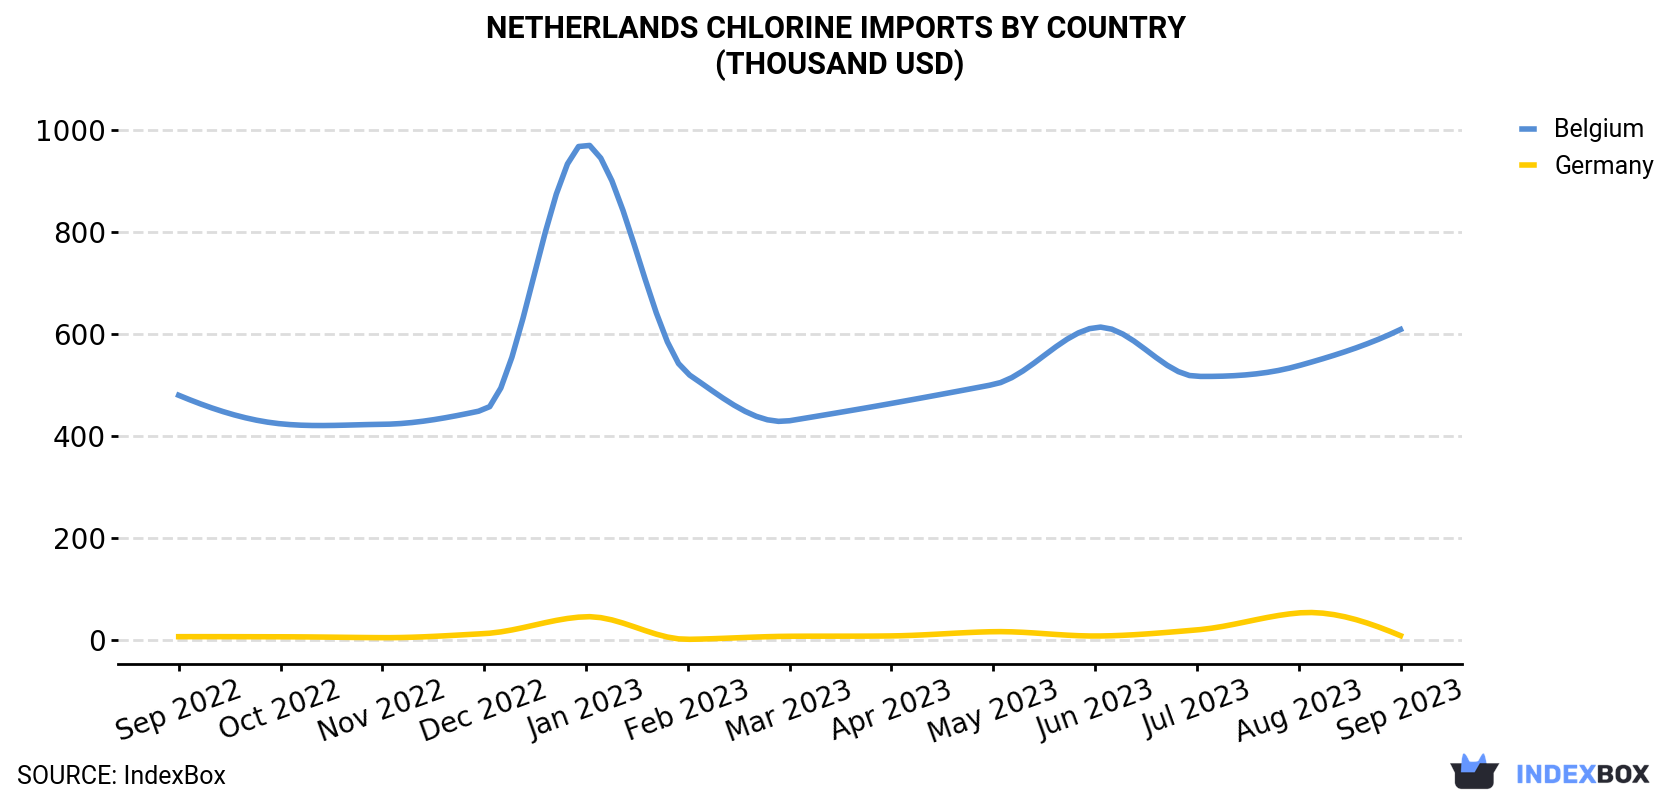 Netherlands Chlorine Imports By Country (Thousand USD)